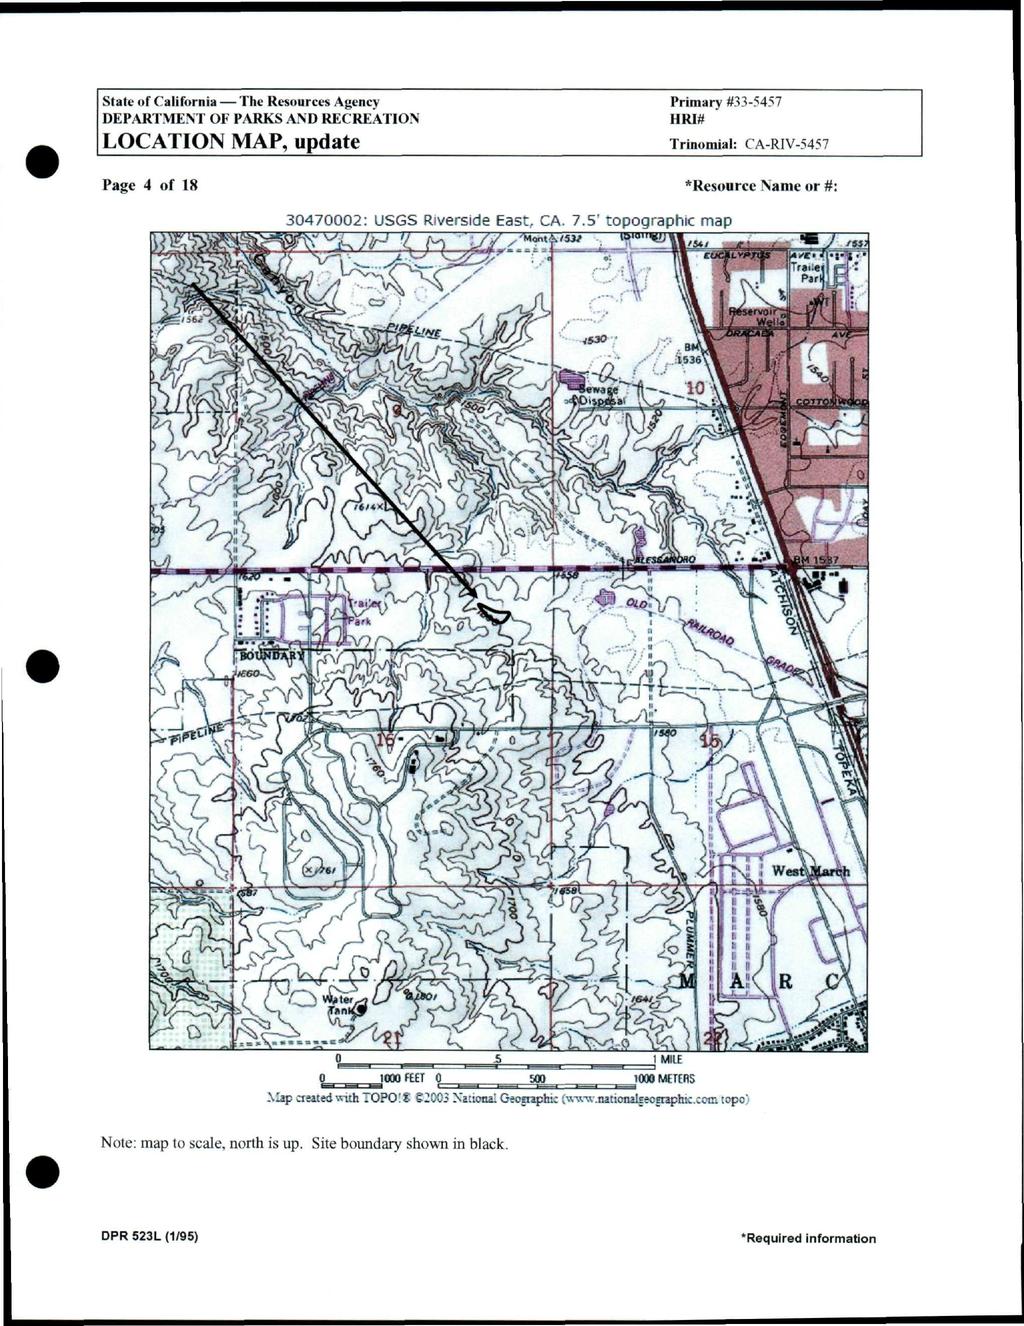 LOCATION MAP, update Primary #335457 Trinomial: CARIV5457 Page 4 of 8 * Resource Name or #: 3047000: USGS Riverside East, CA. 7.